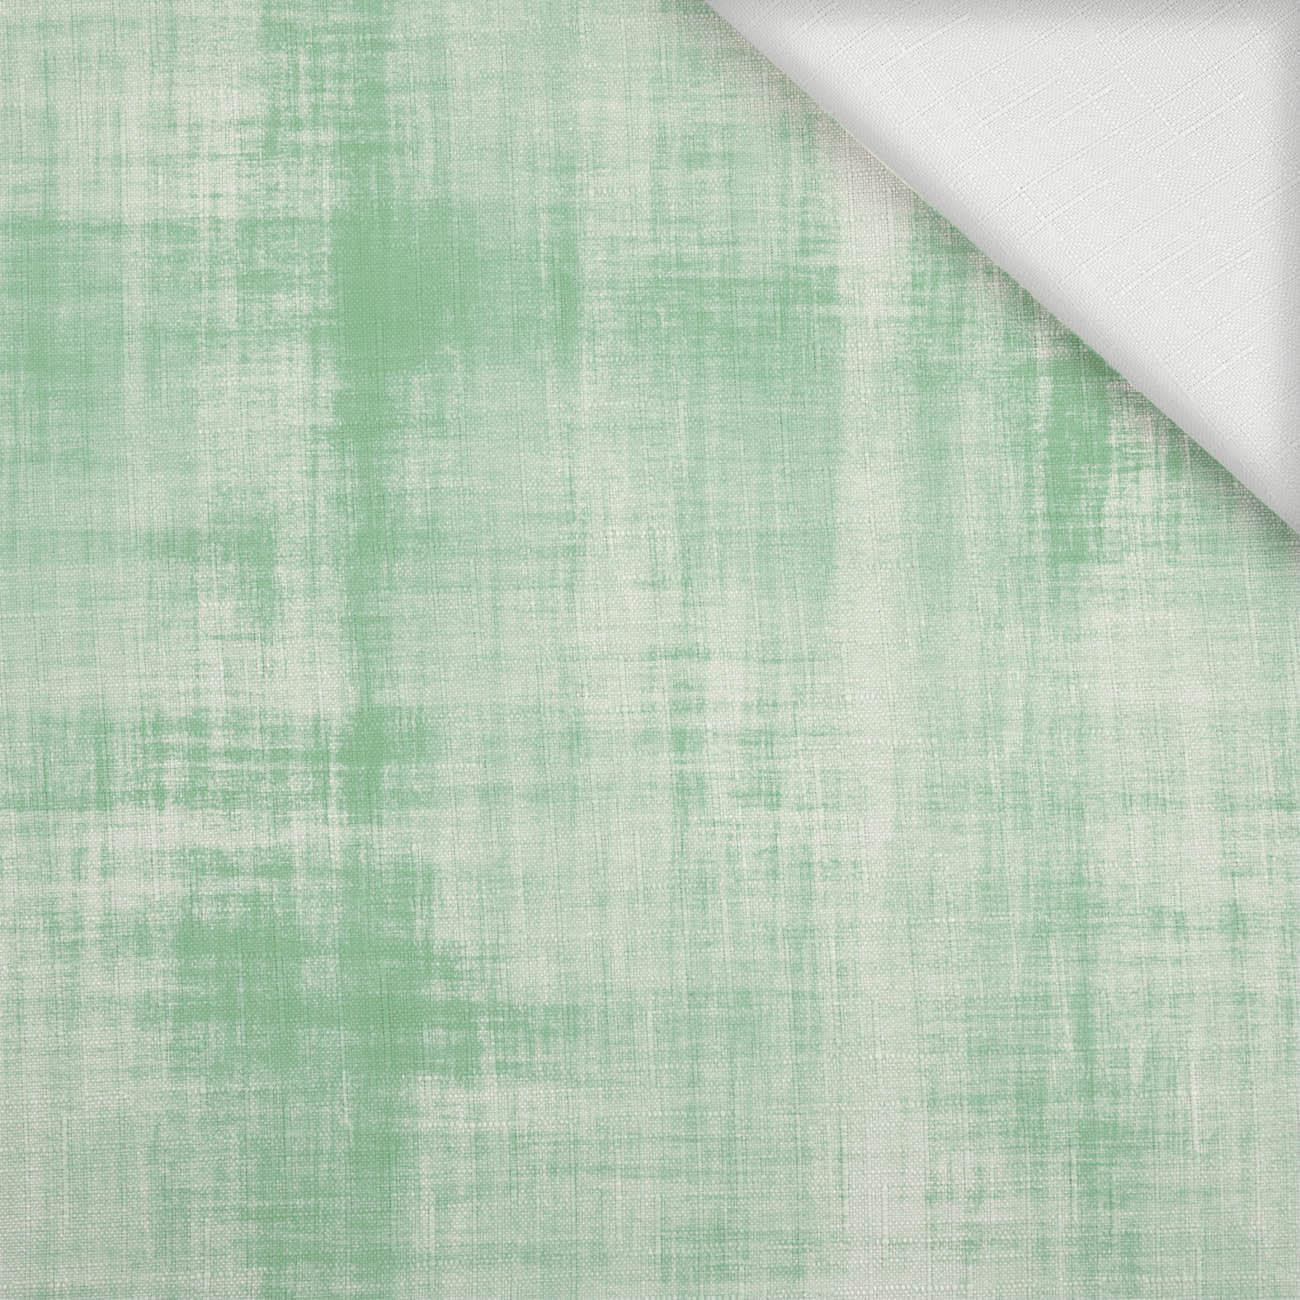 ACID WASH PAT. 2 (mint) - Woven Fabric for tablecloths